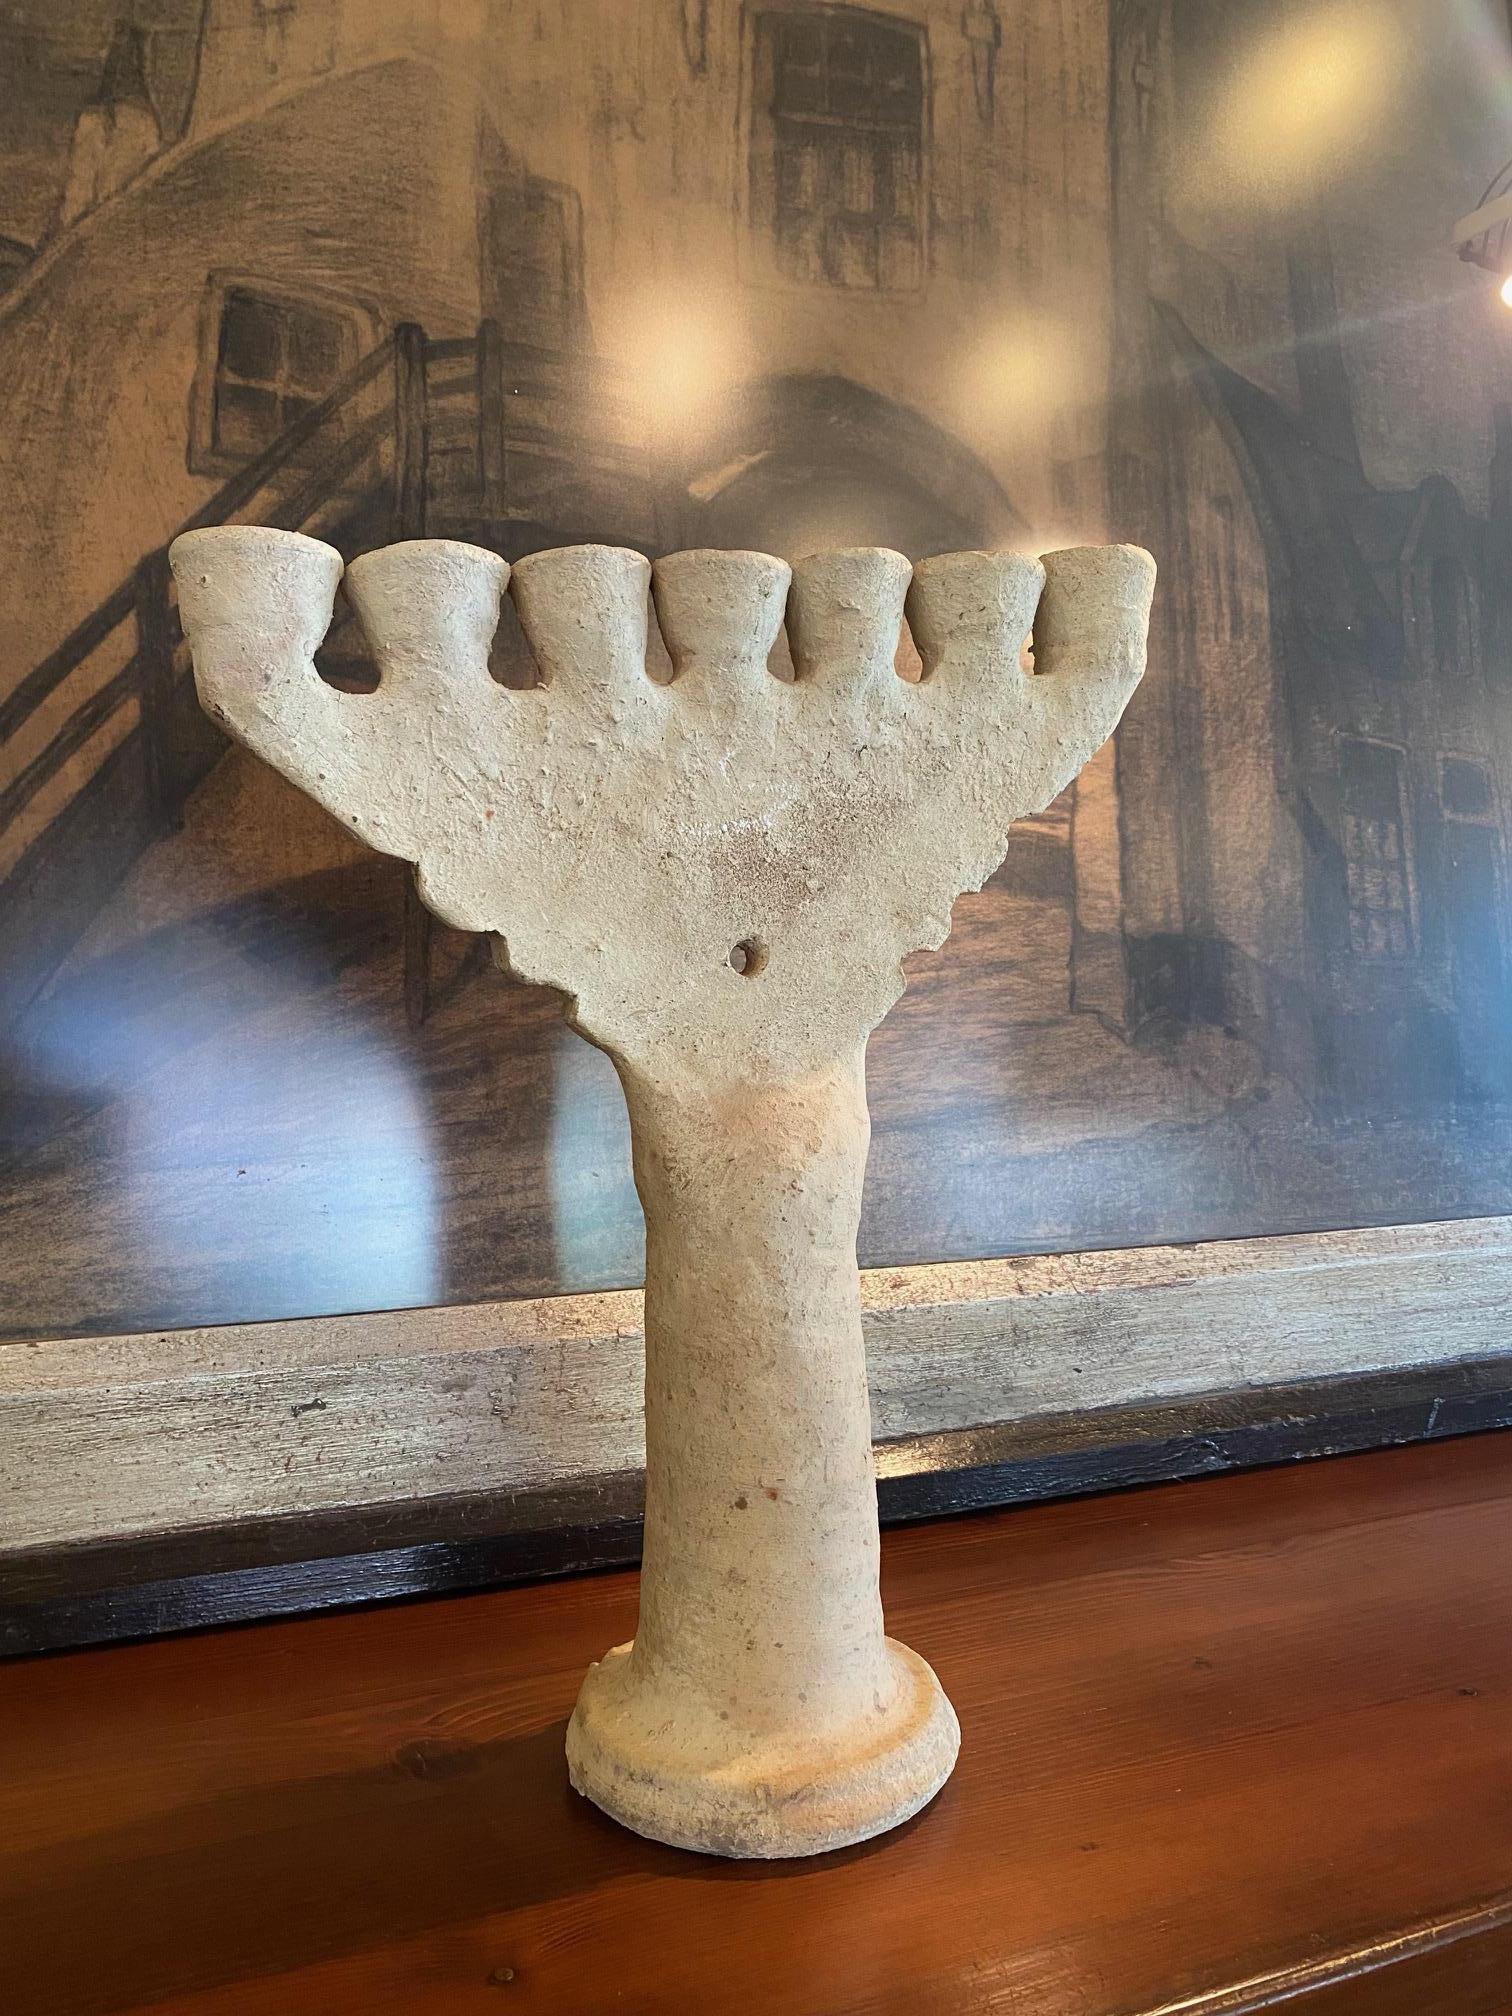 Seven candle handmade ceramic menorah or candelabra. Unglazed matte surface has a warm organic texture with natural earth tone coloring.  Pedestal base supports seven candle cups.  1970's